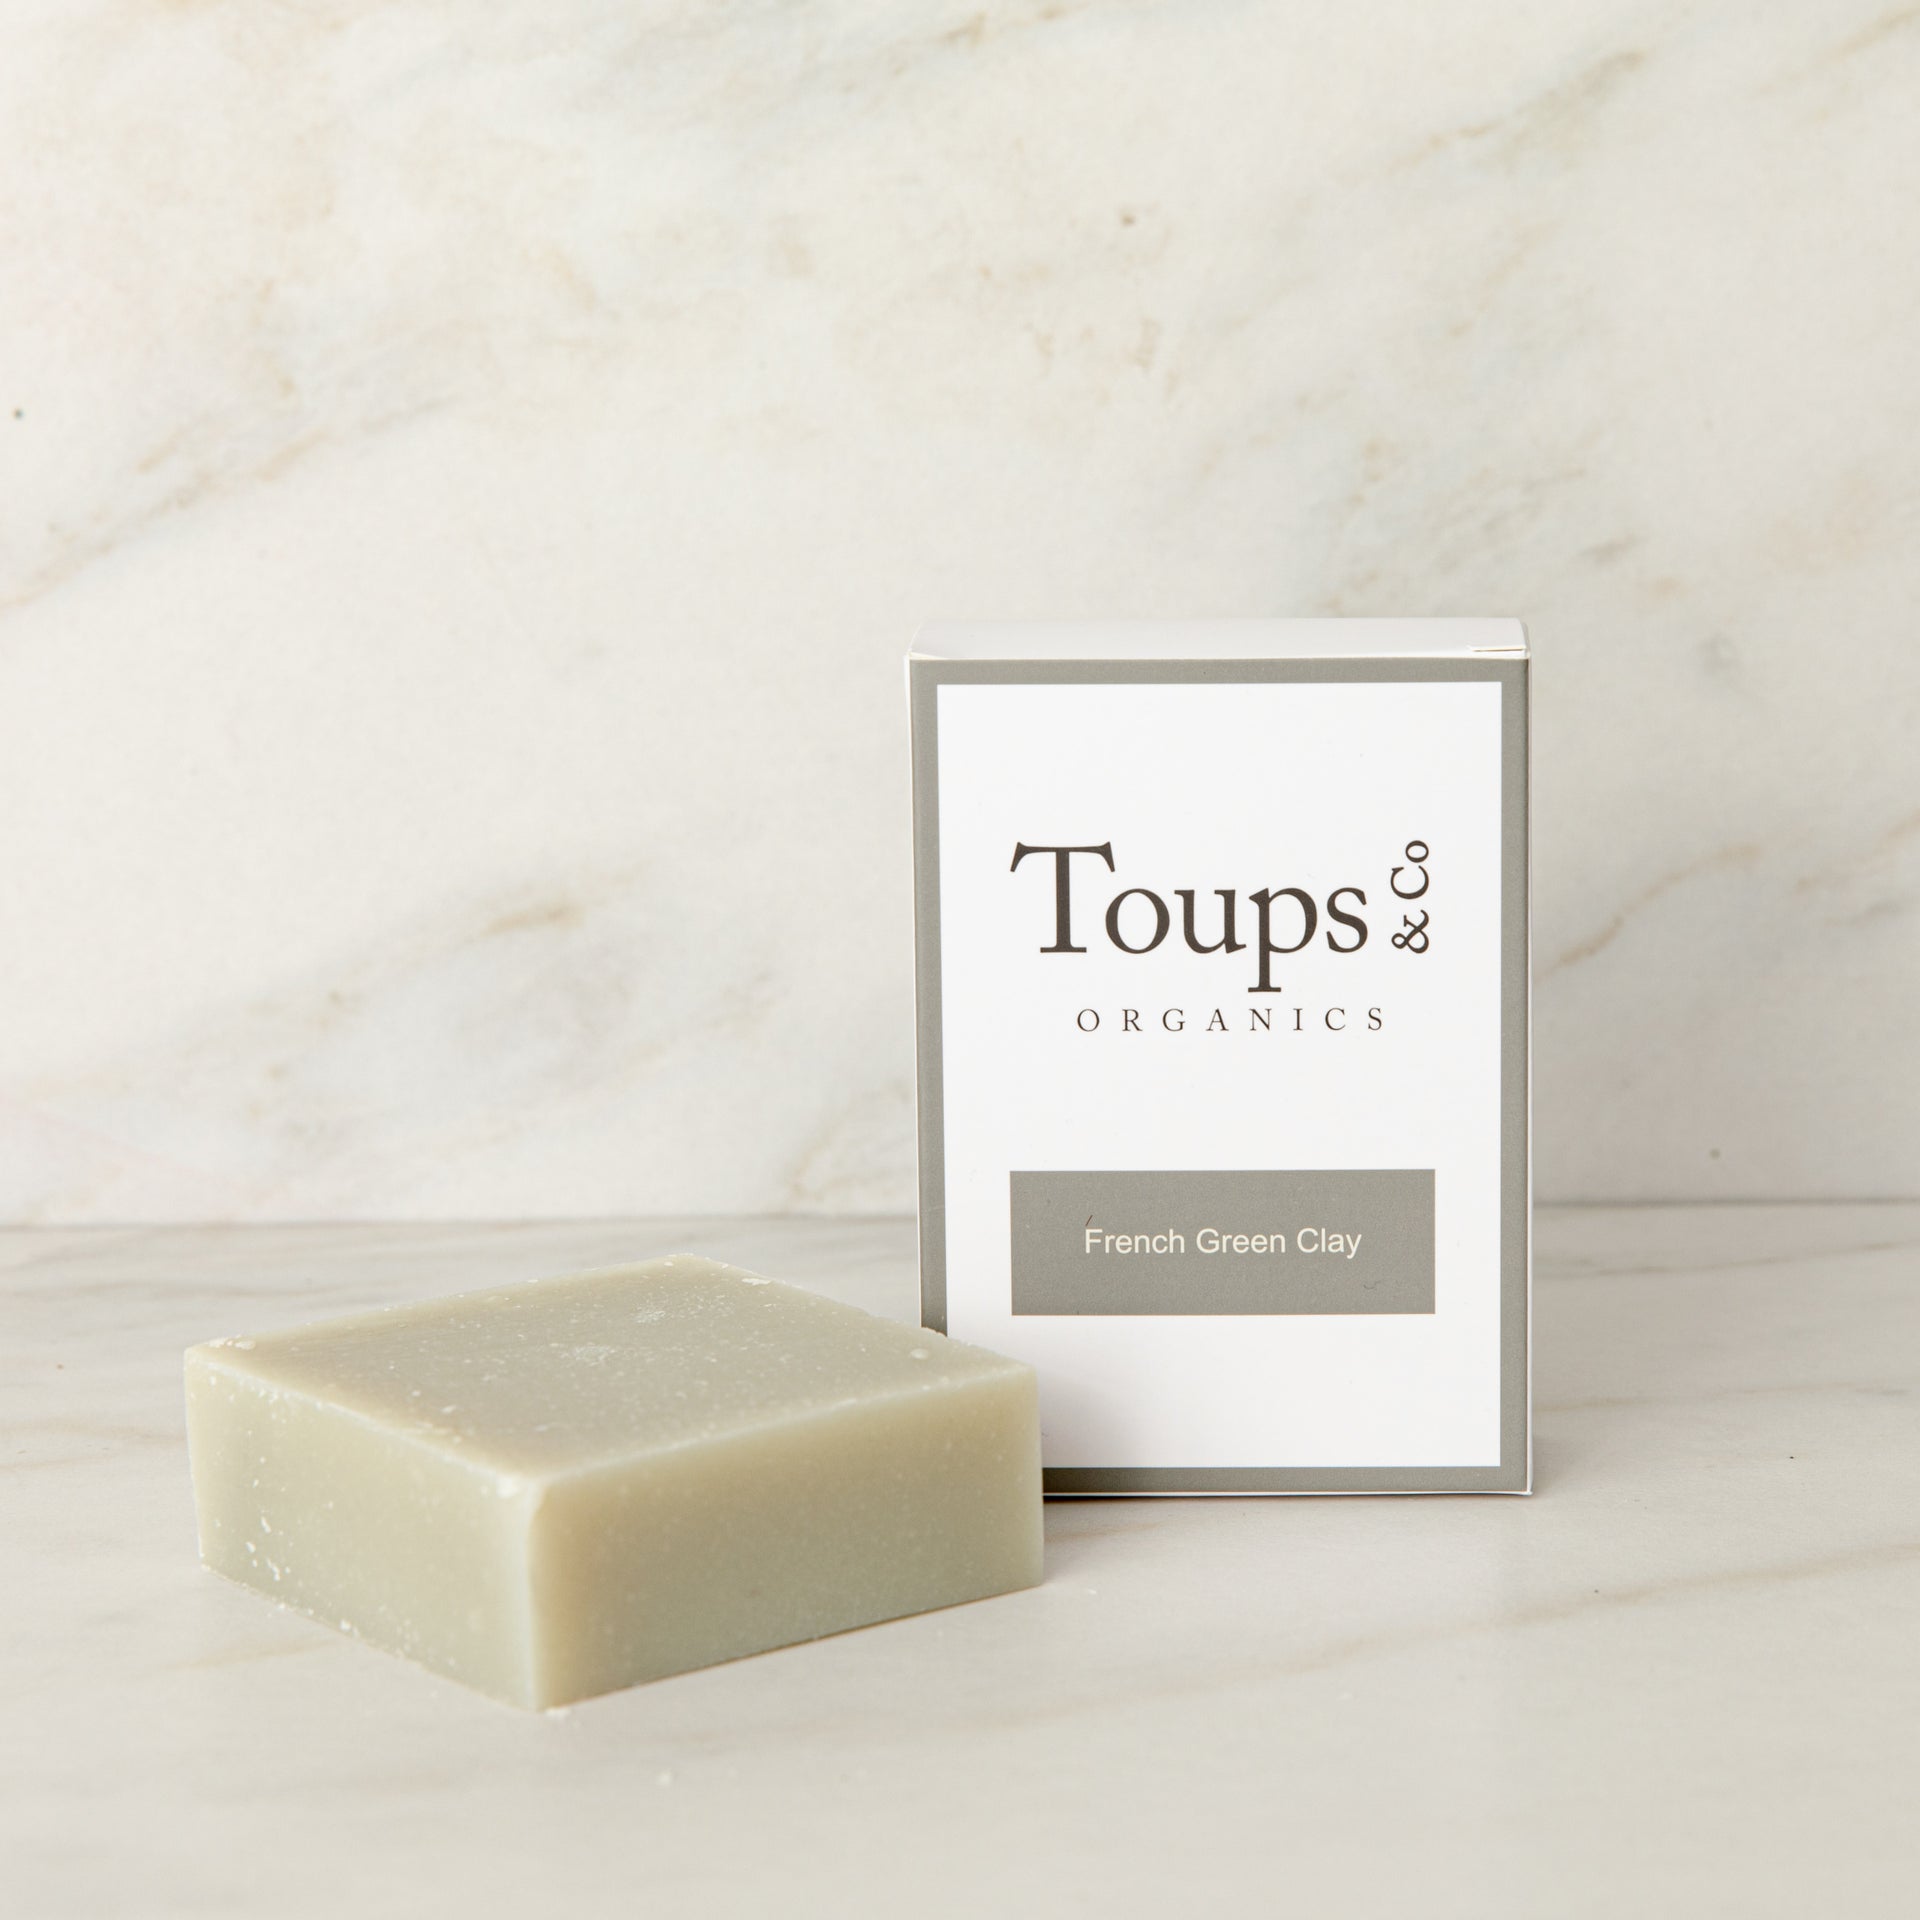 French Green Clay Soap - Ravenscourt Apothecary